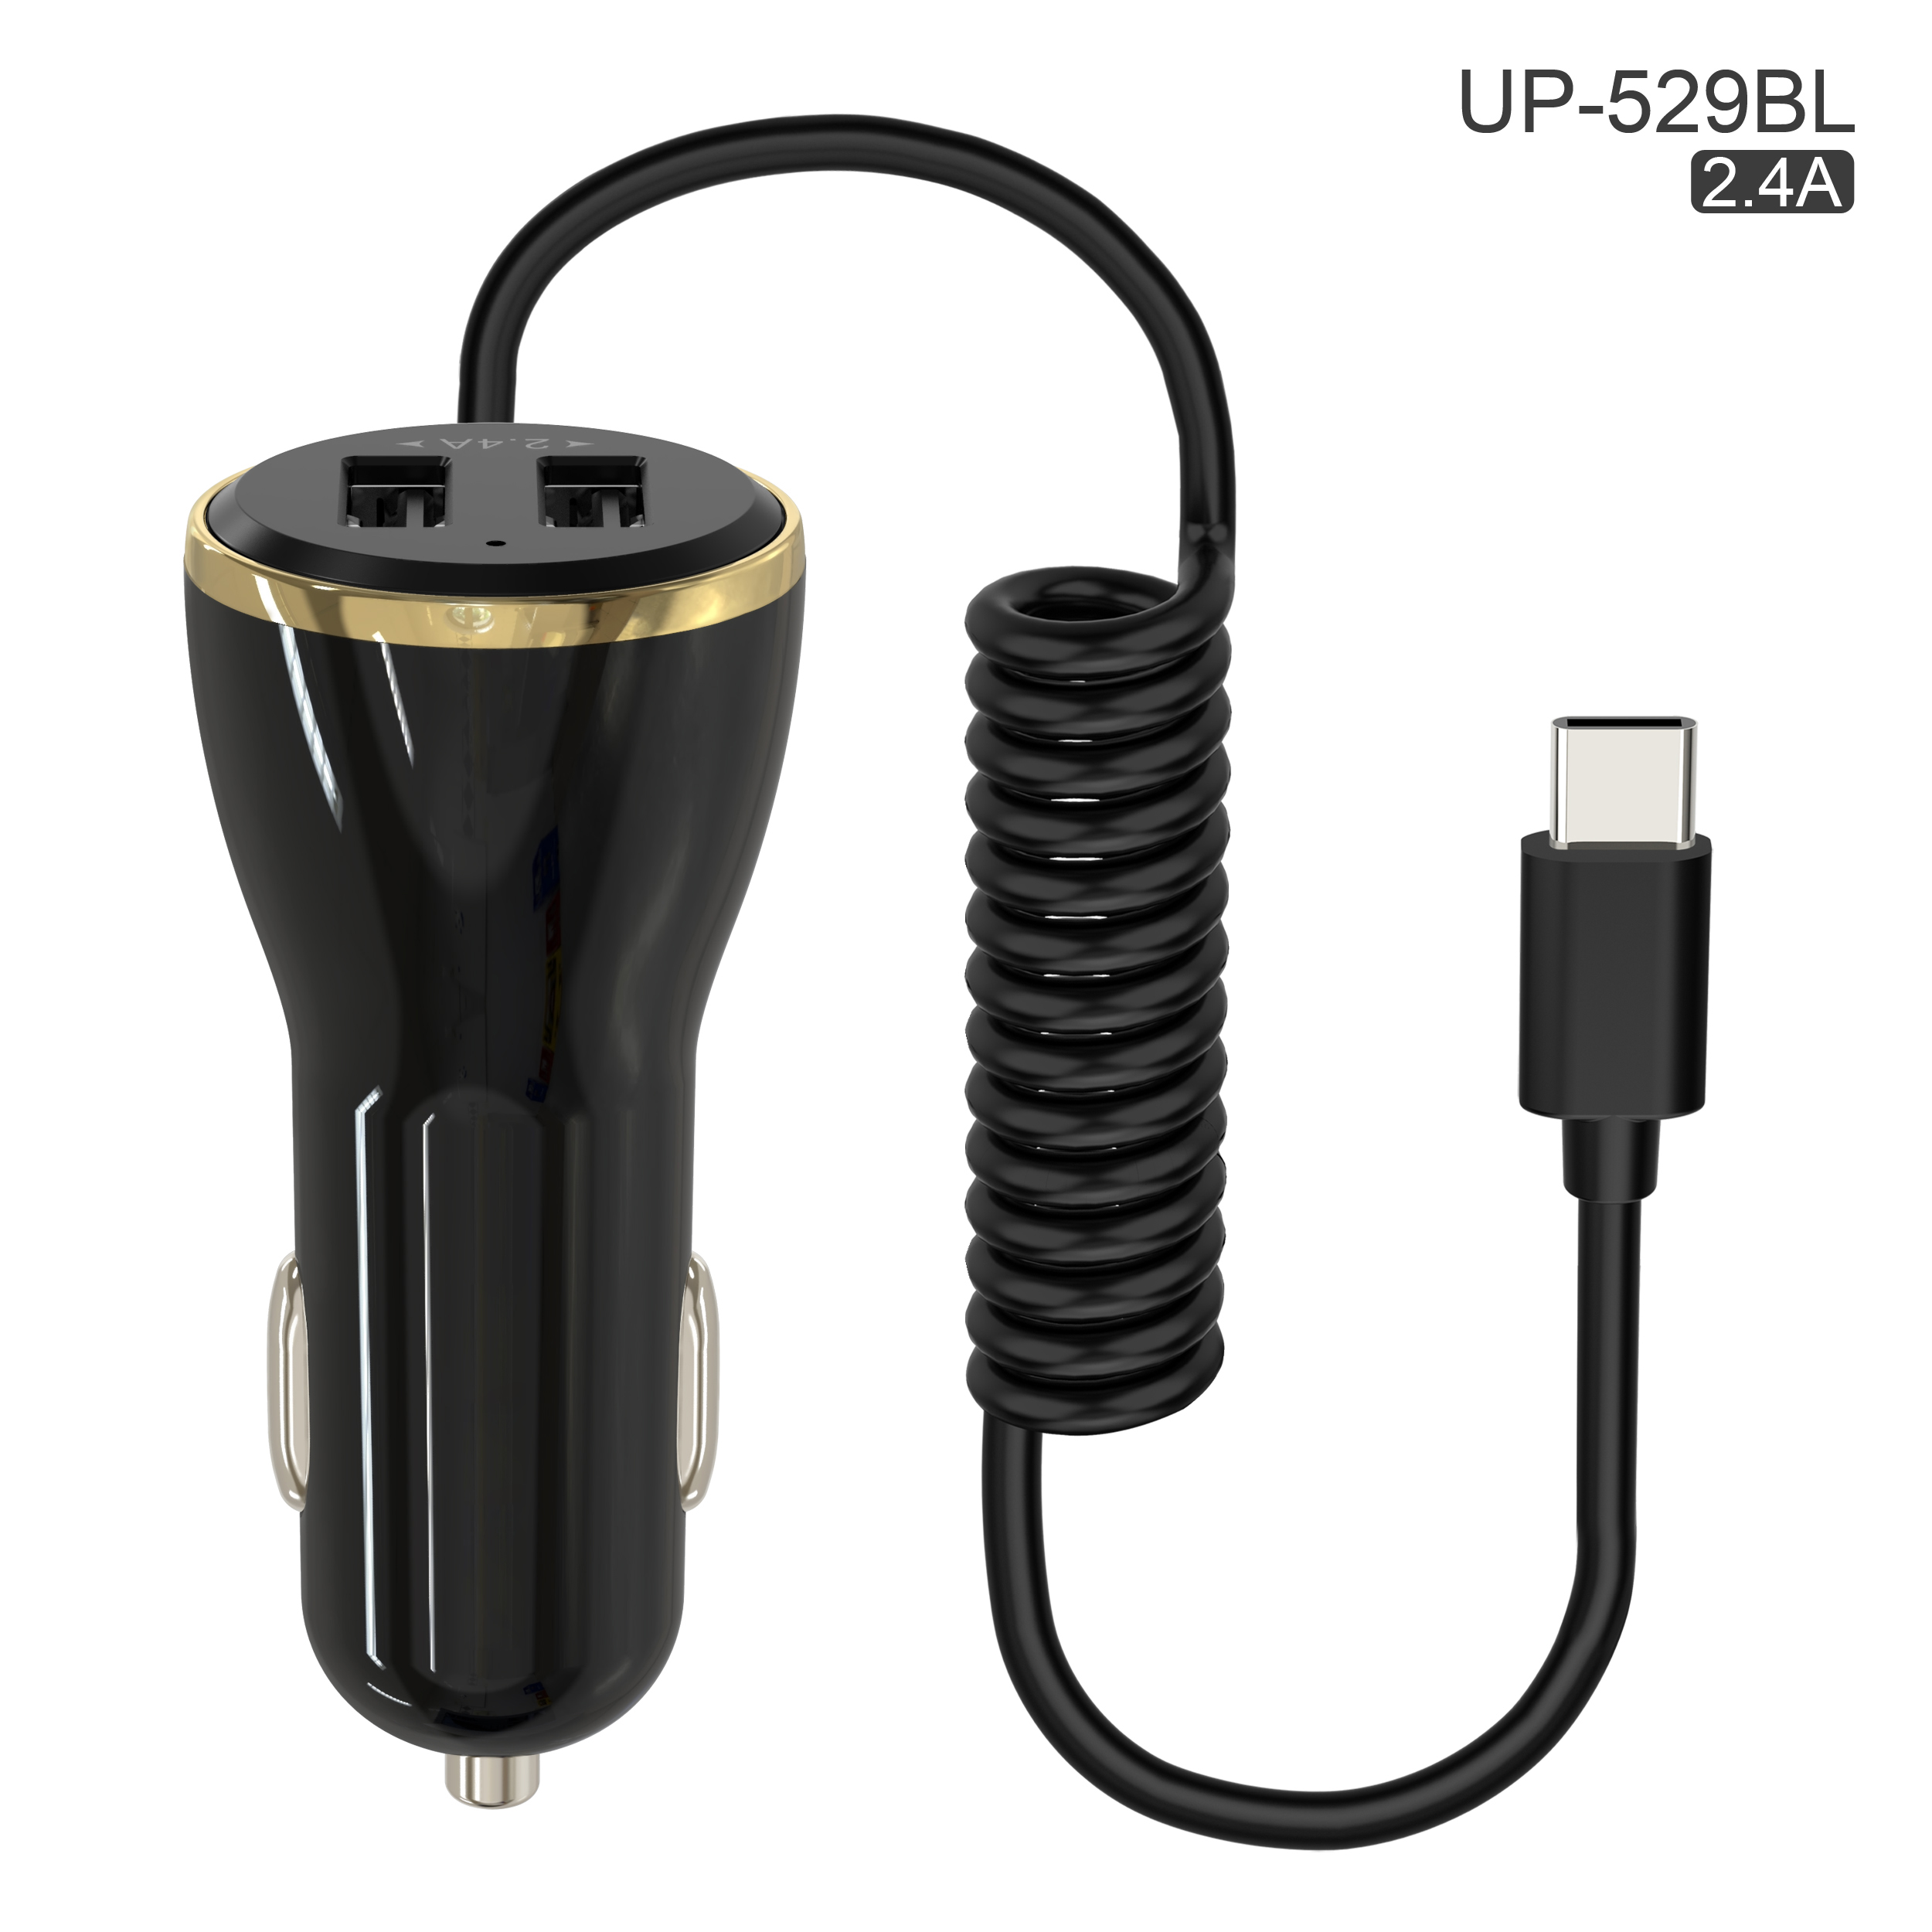 Dual port USB car charger with telescopic Type-c cable